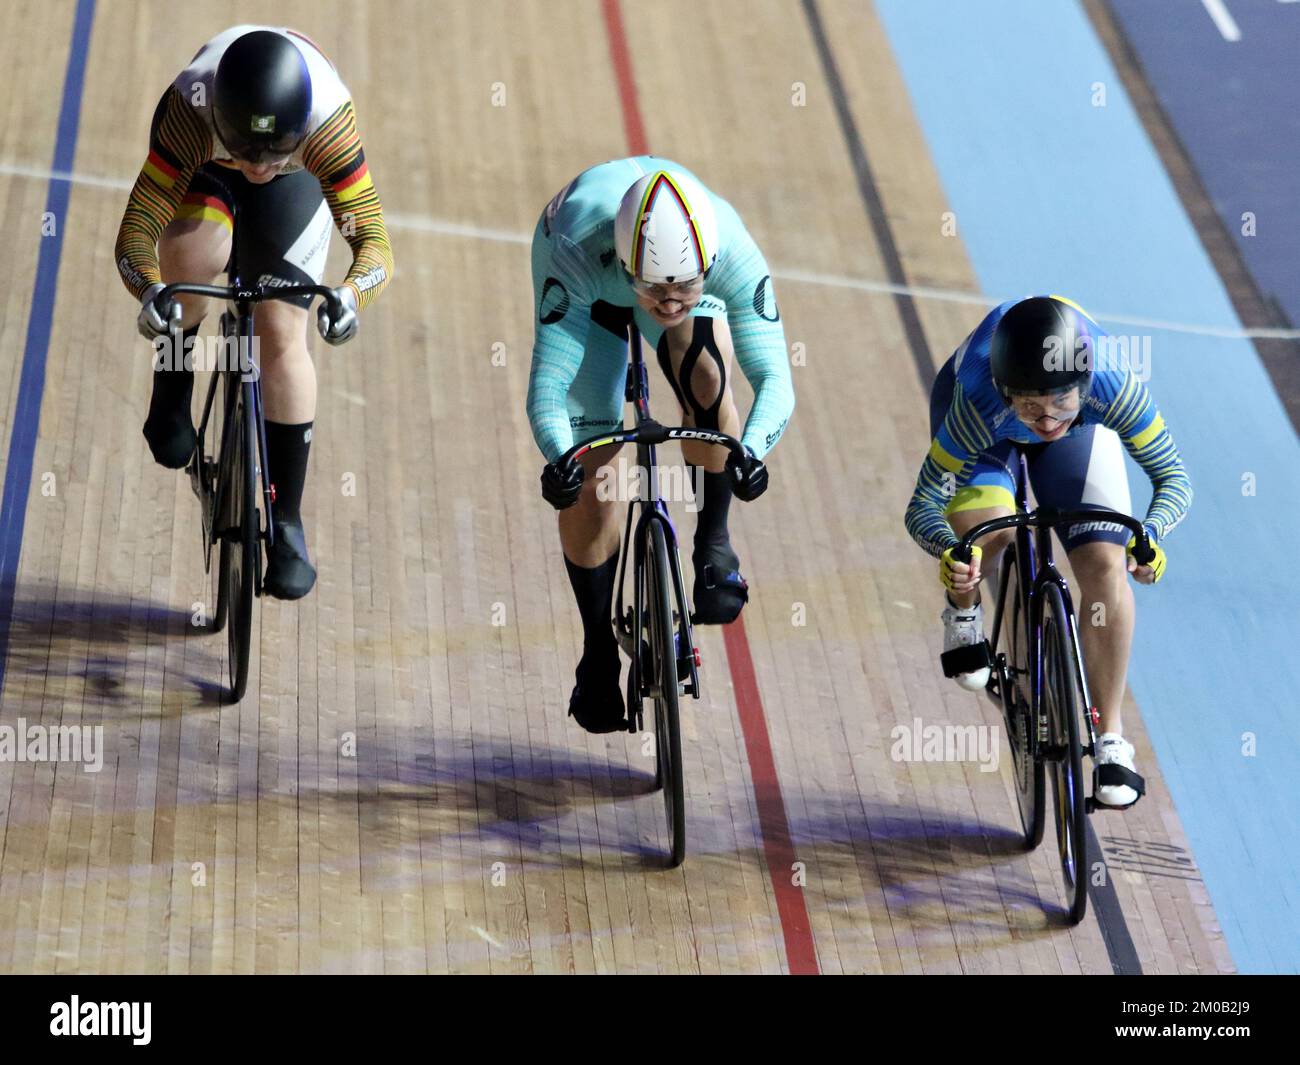 Track Cycling Champions League, Lee Valley Velodrome London UK. Mathilde GROS (FRA) applying pressure to take the win in the Women's Sprint Semi-final Stock Photo